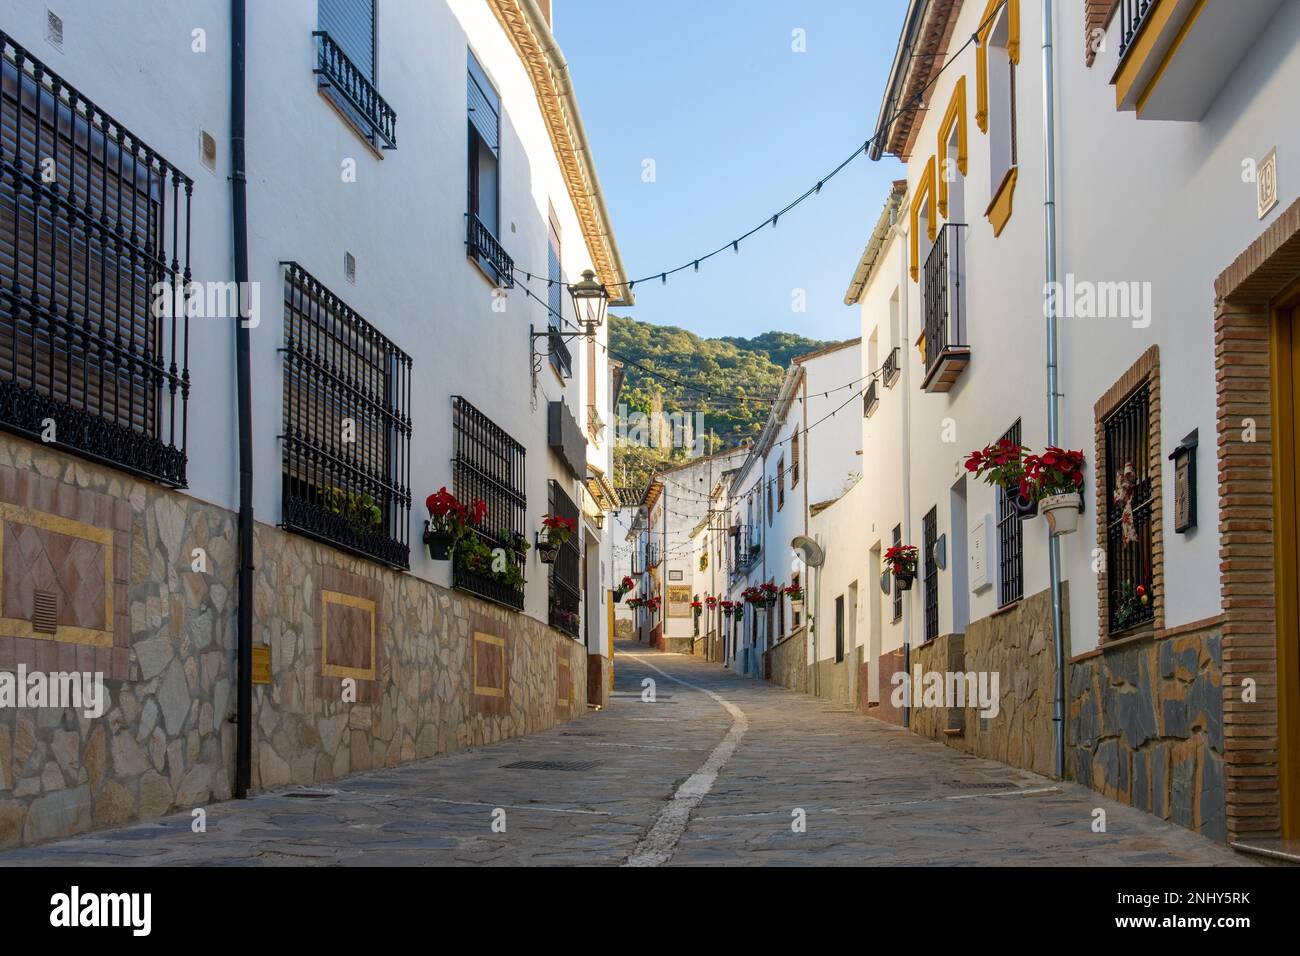 street of typical Andalusian town in the province of Malaga (Jimena de libar) Stock Photo